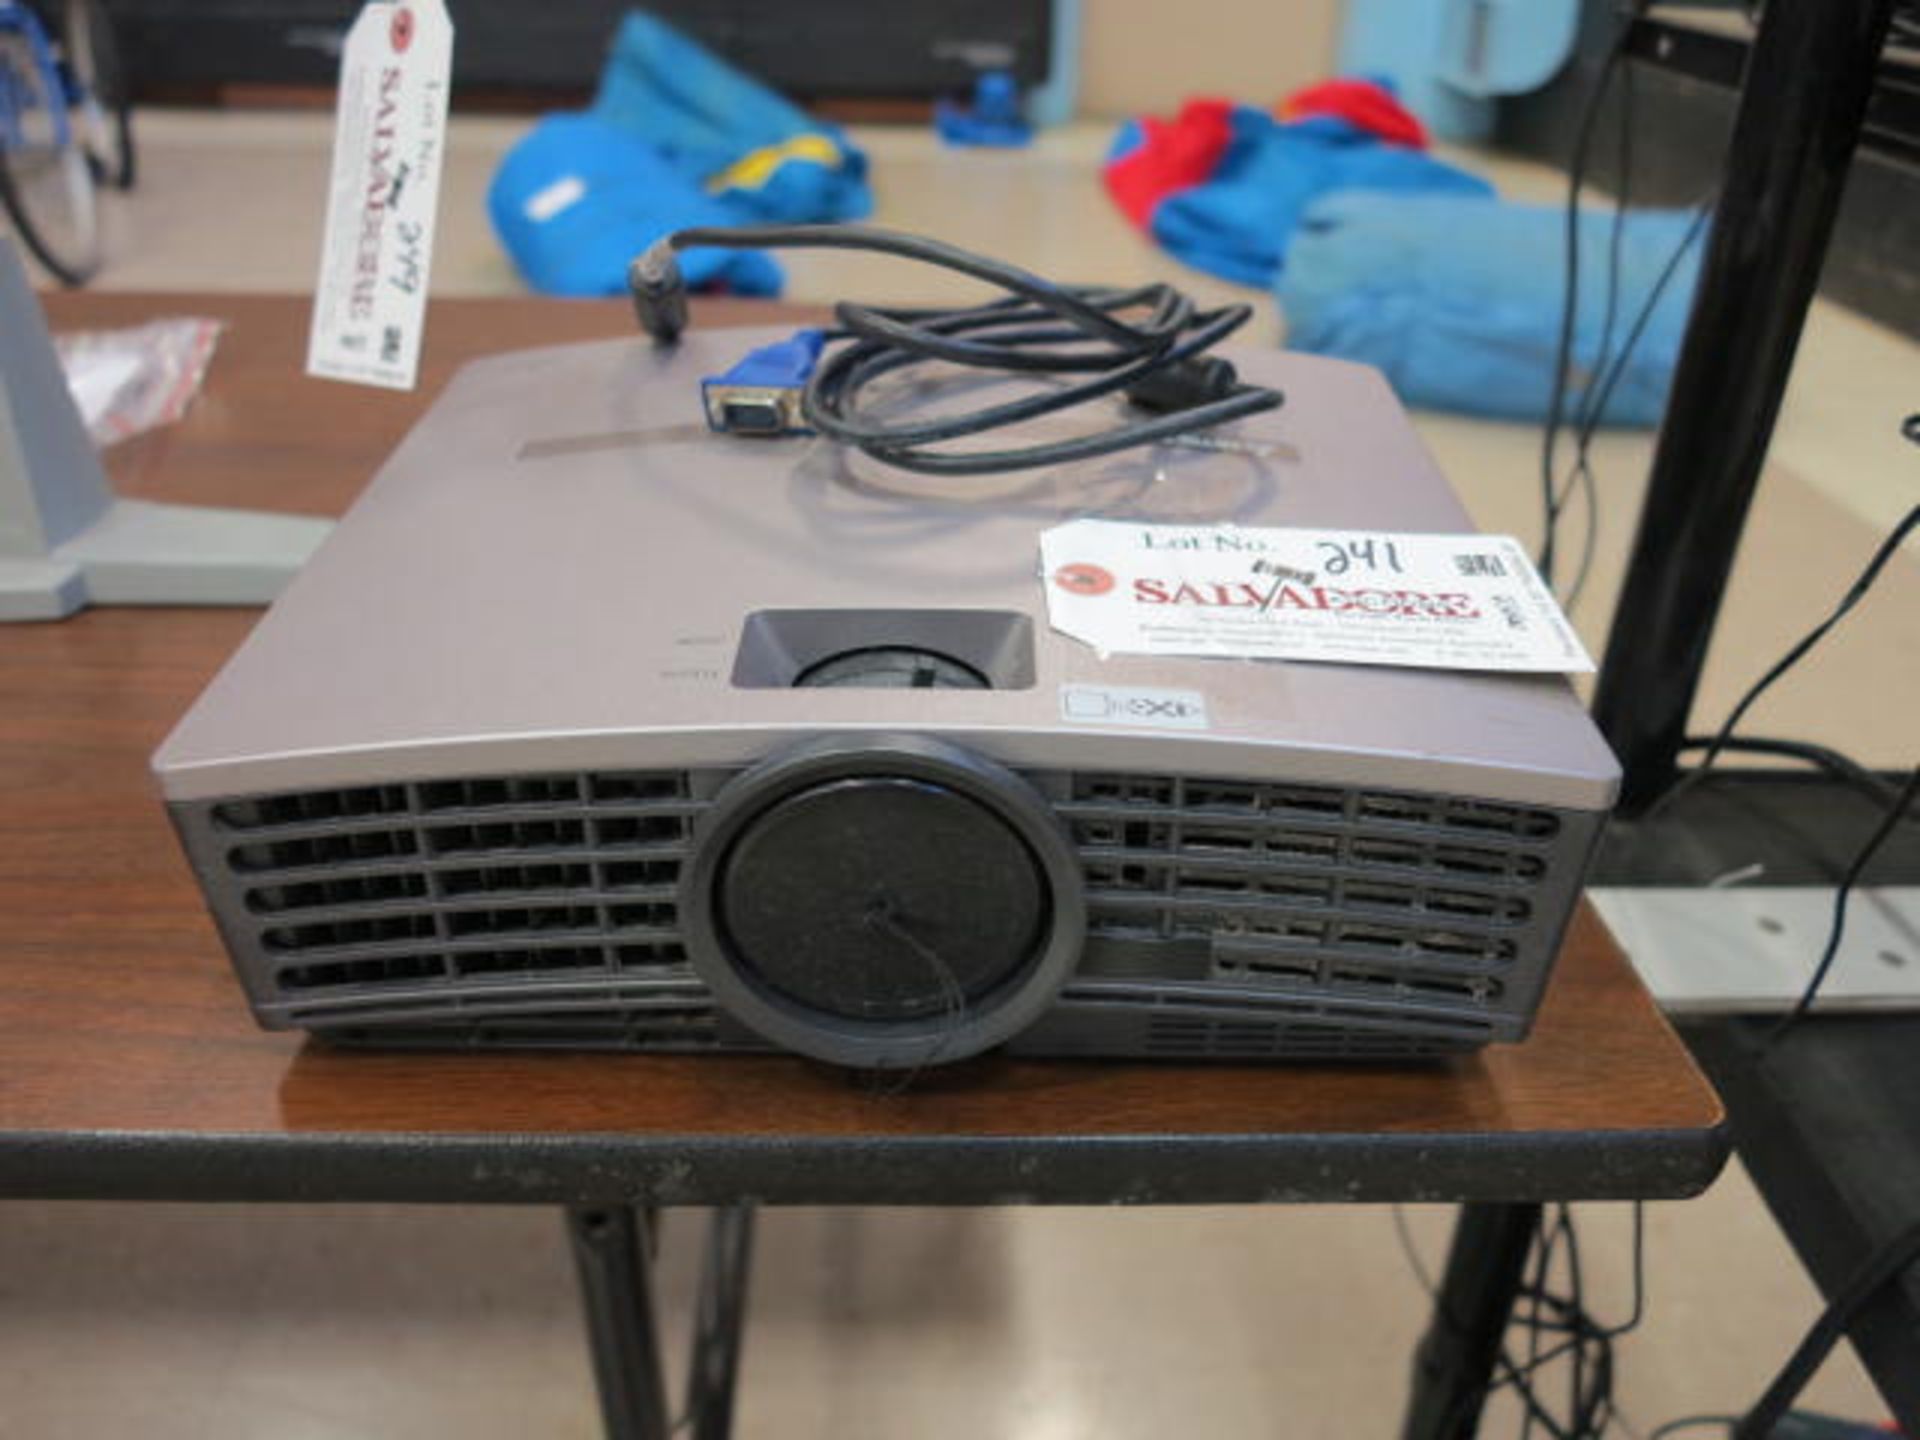 Mitsubishi Model EX1006 Projector Located in Gym